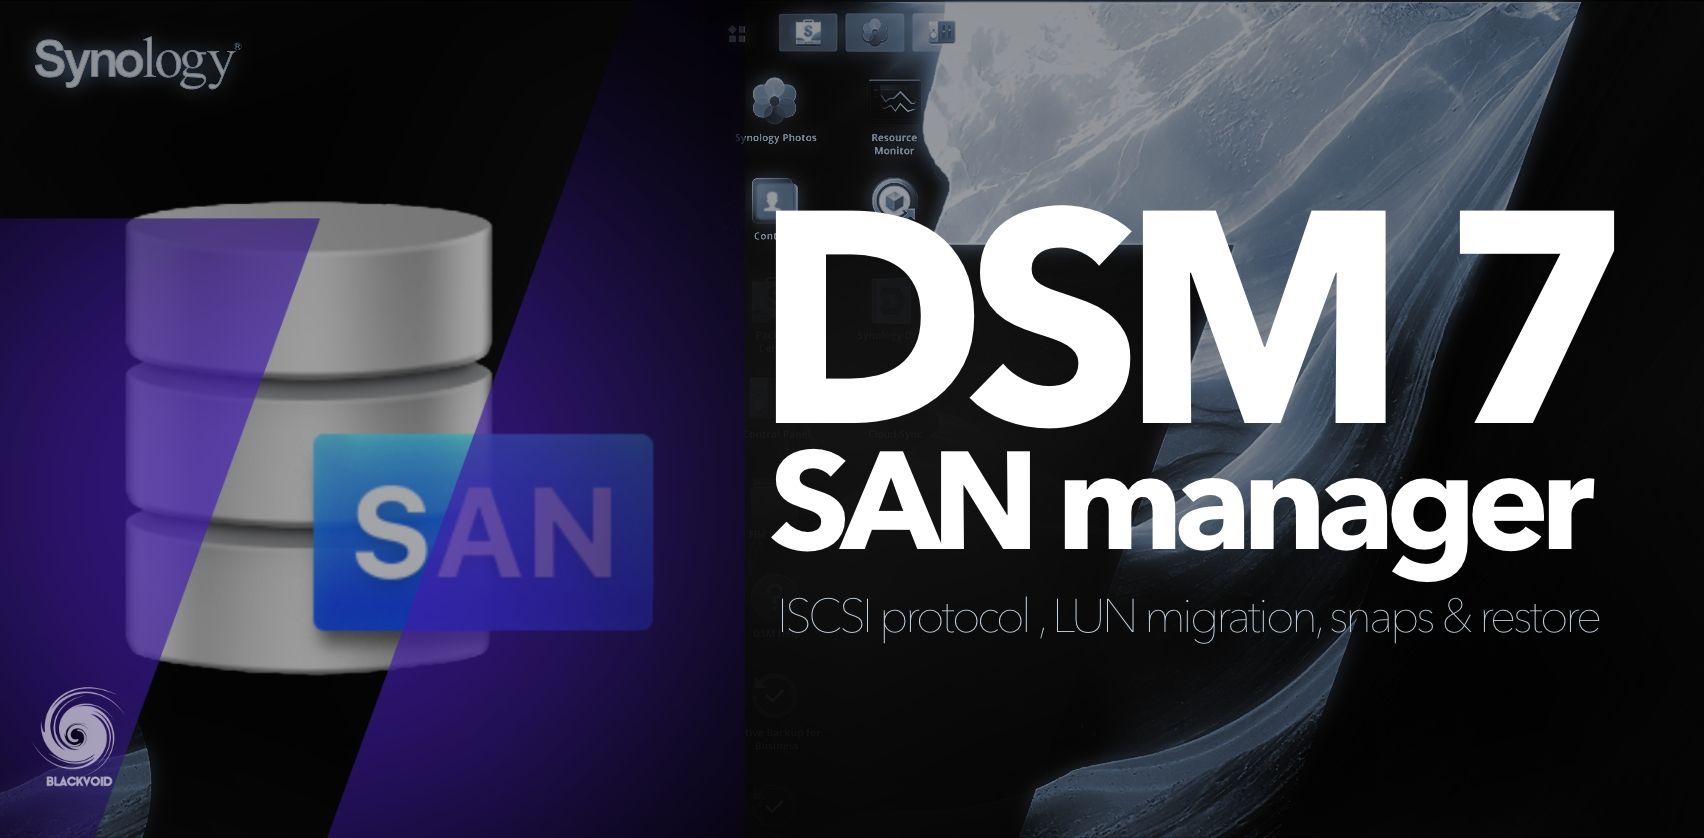 NEW SAN manager in DSM 7